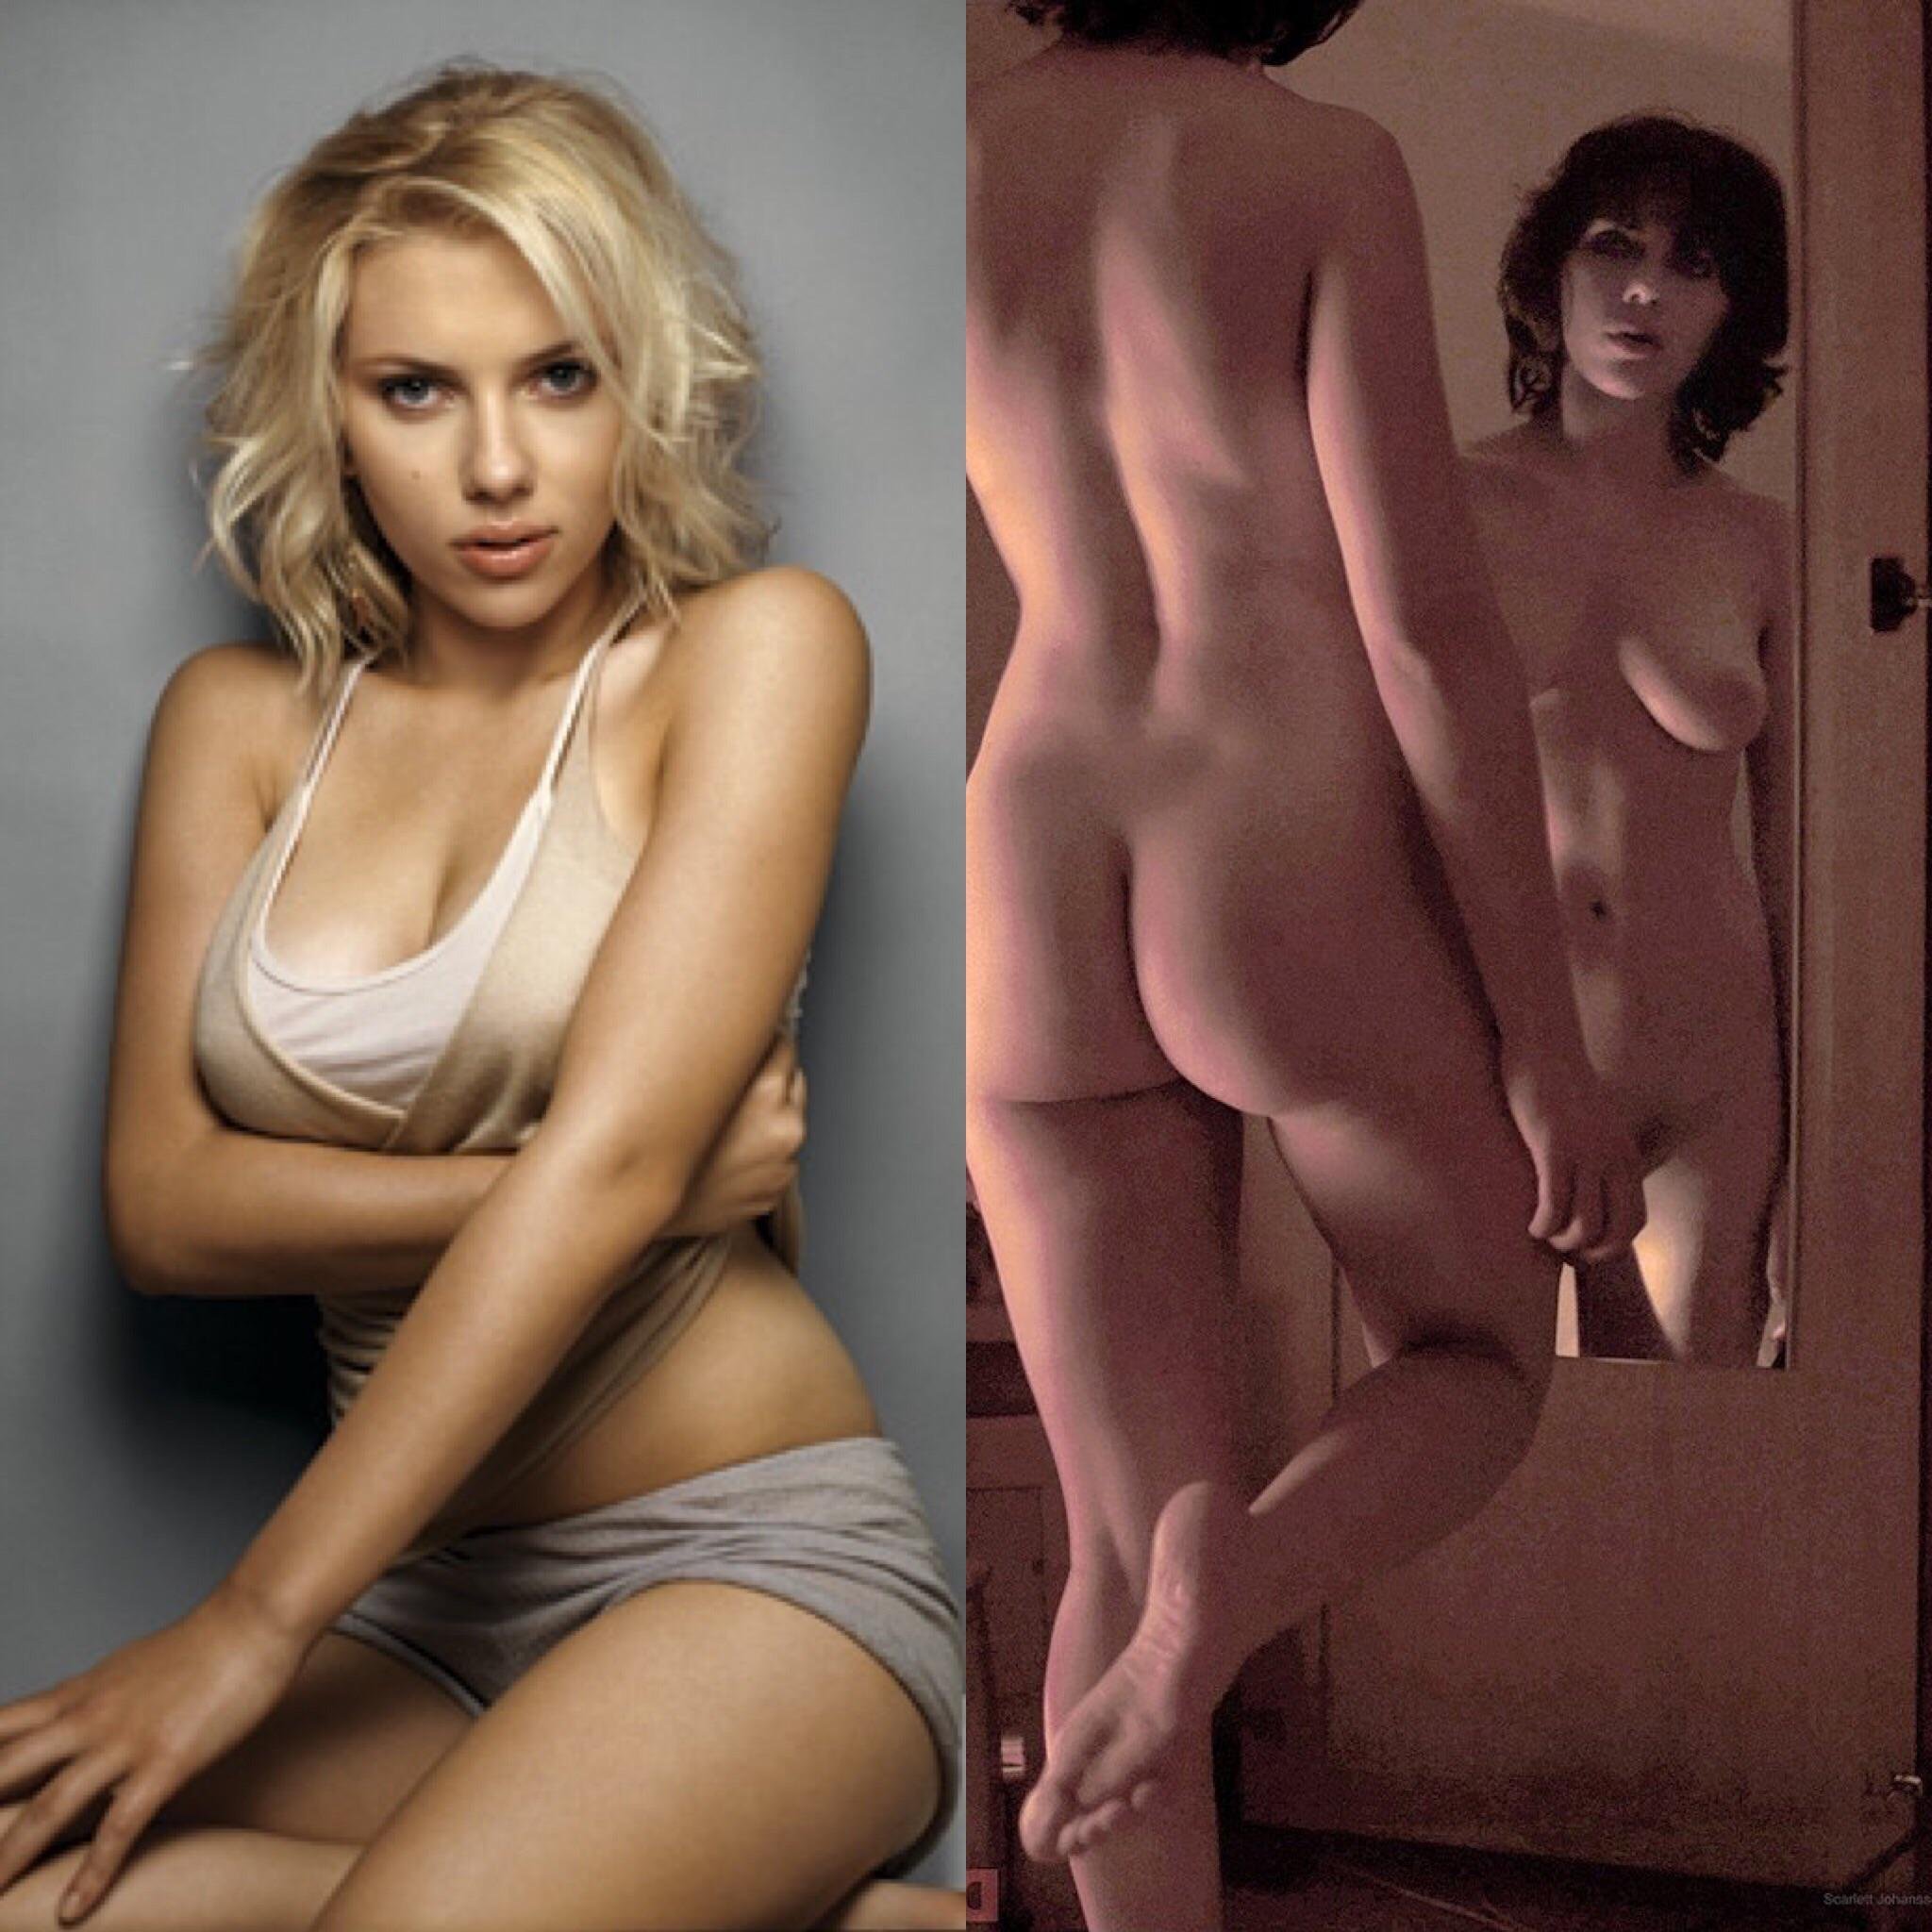 christopher ansah recommends scarlett johansson naked tits pic